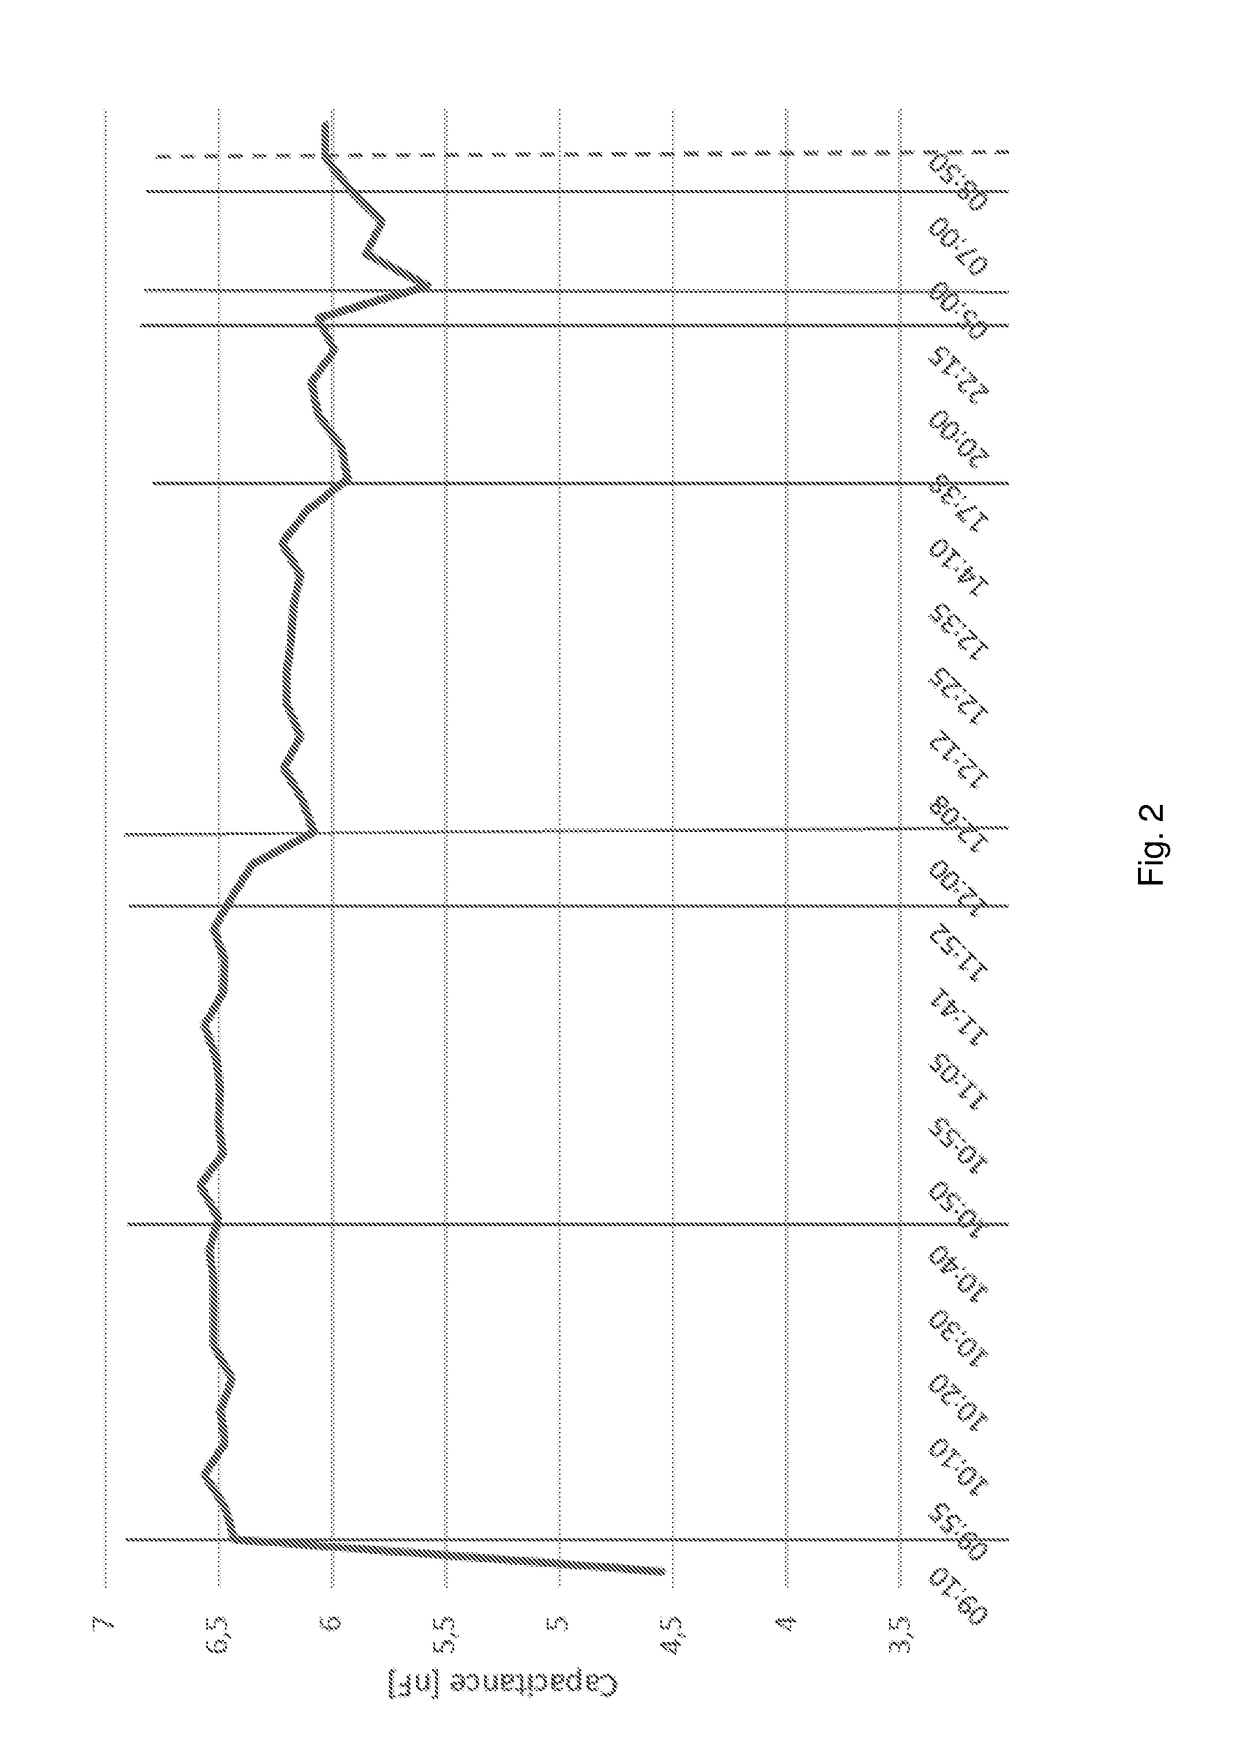 A device and method for providing a measure of a circumference of a body part